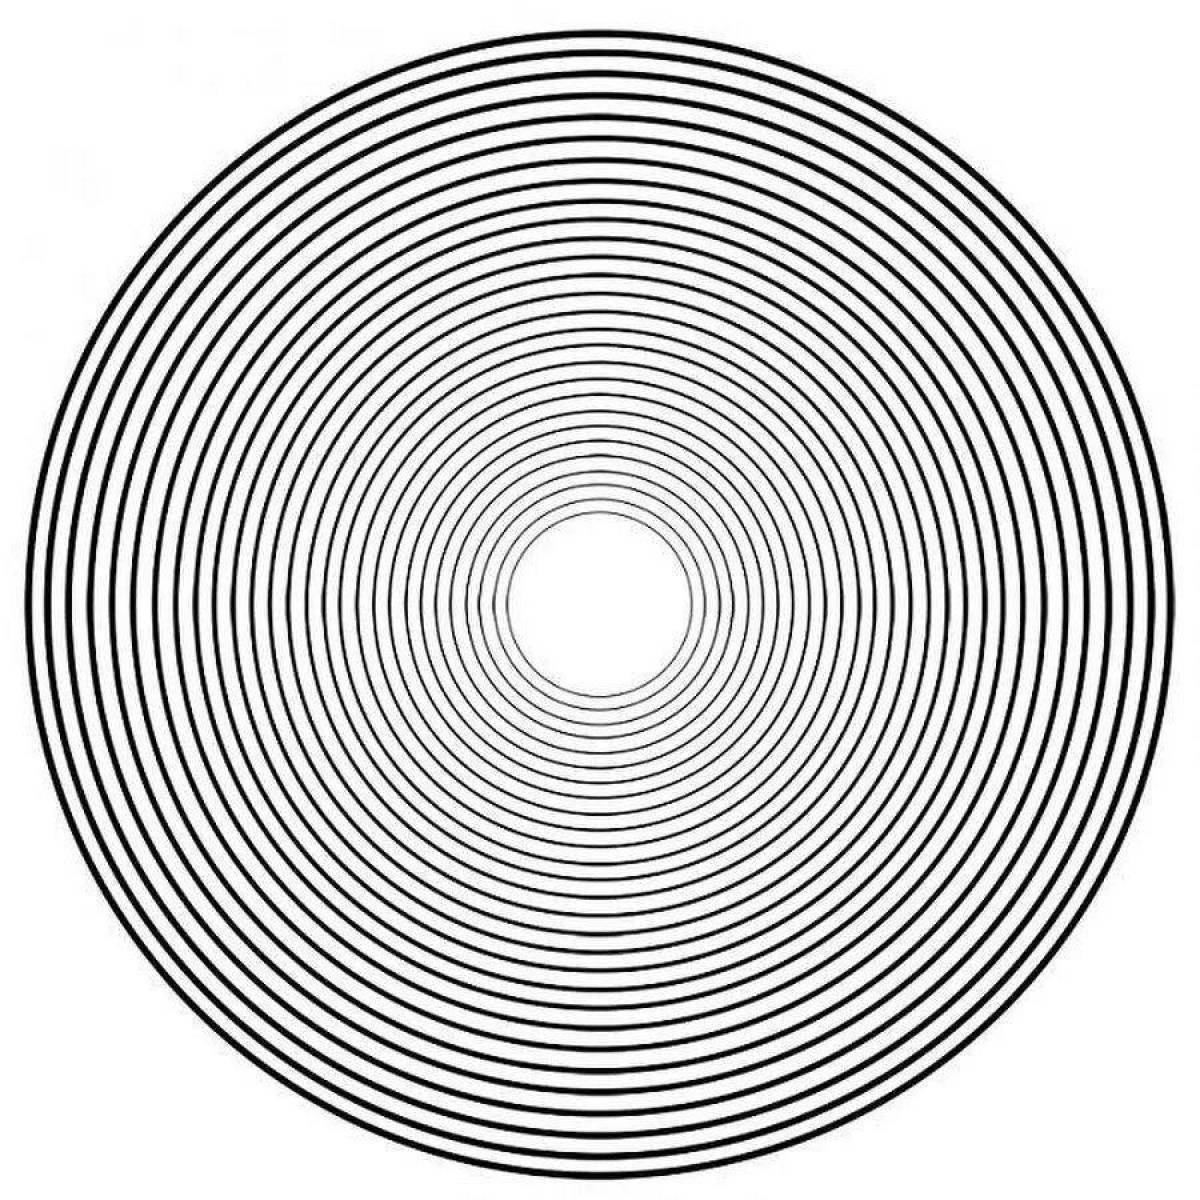 Fine round lines create coloring